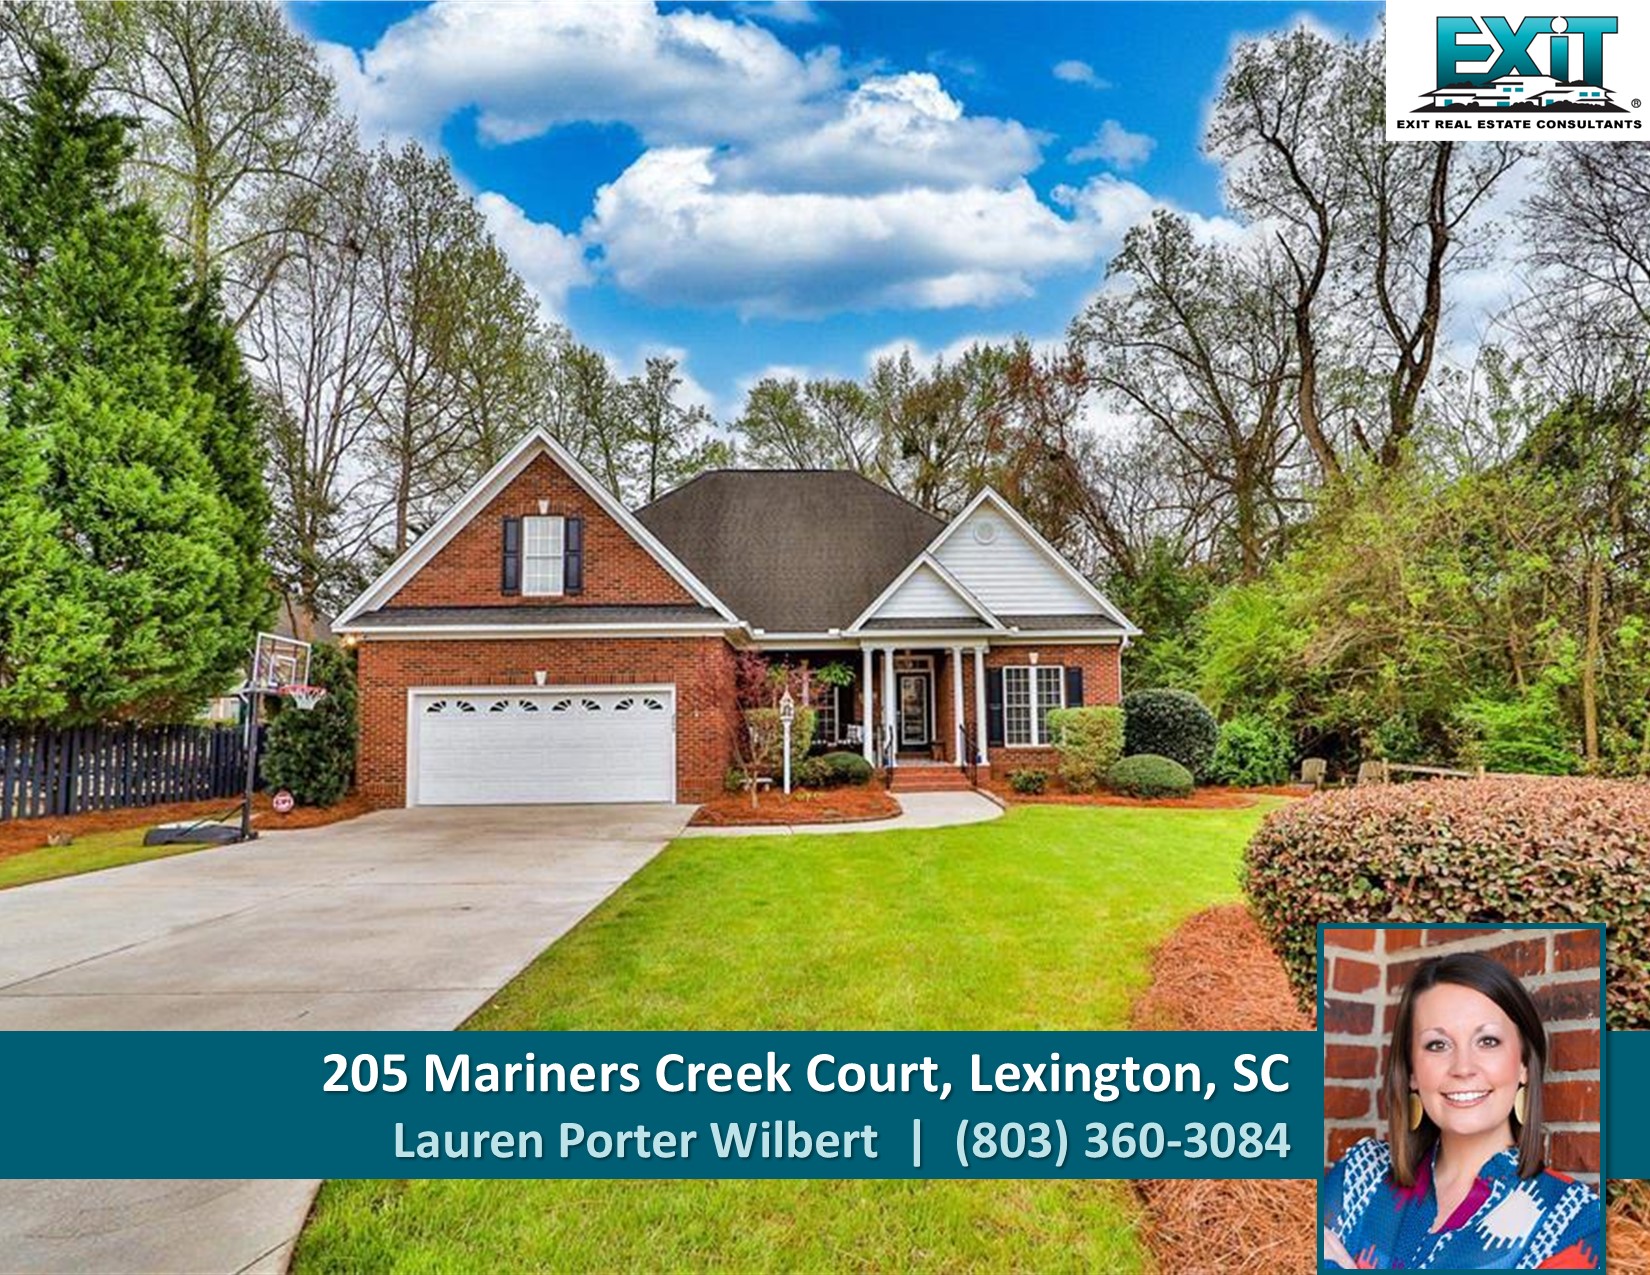 Just listed in Mariners Creek